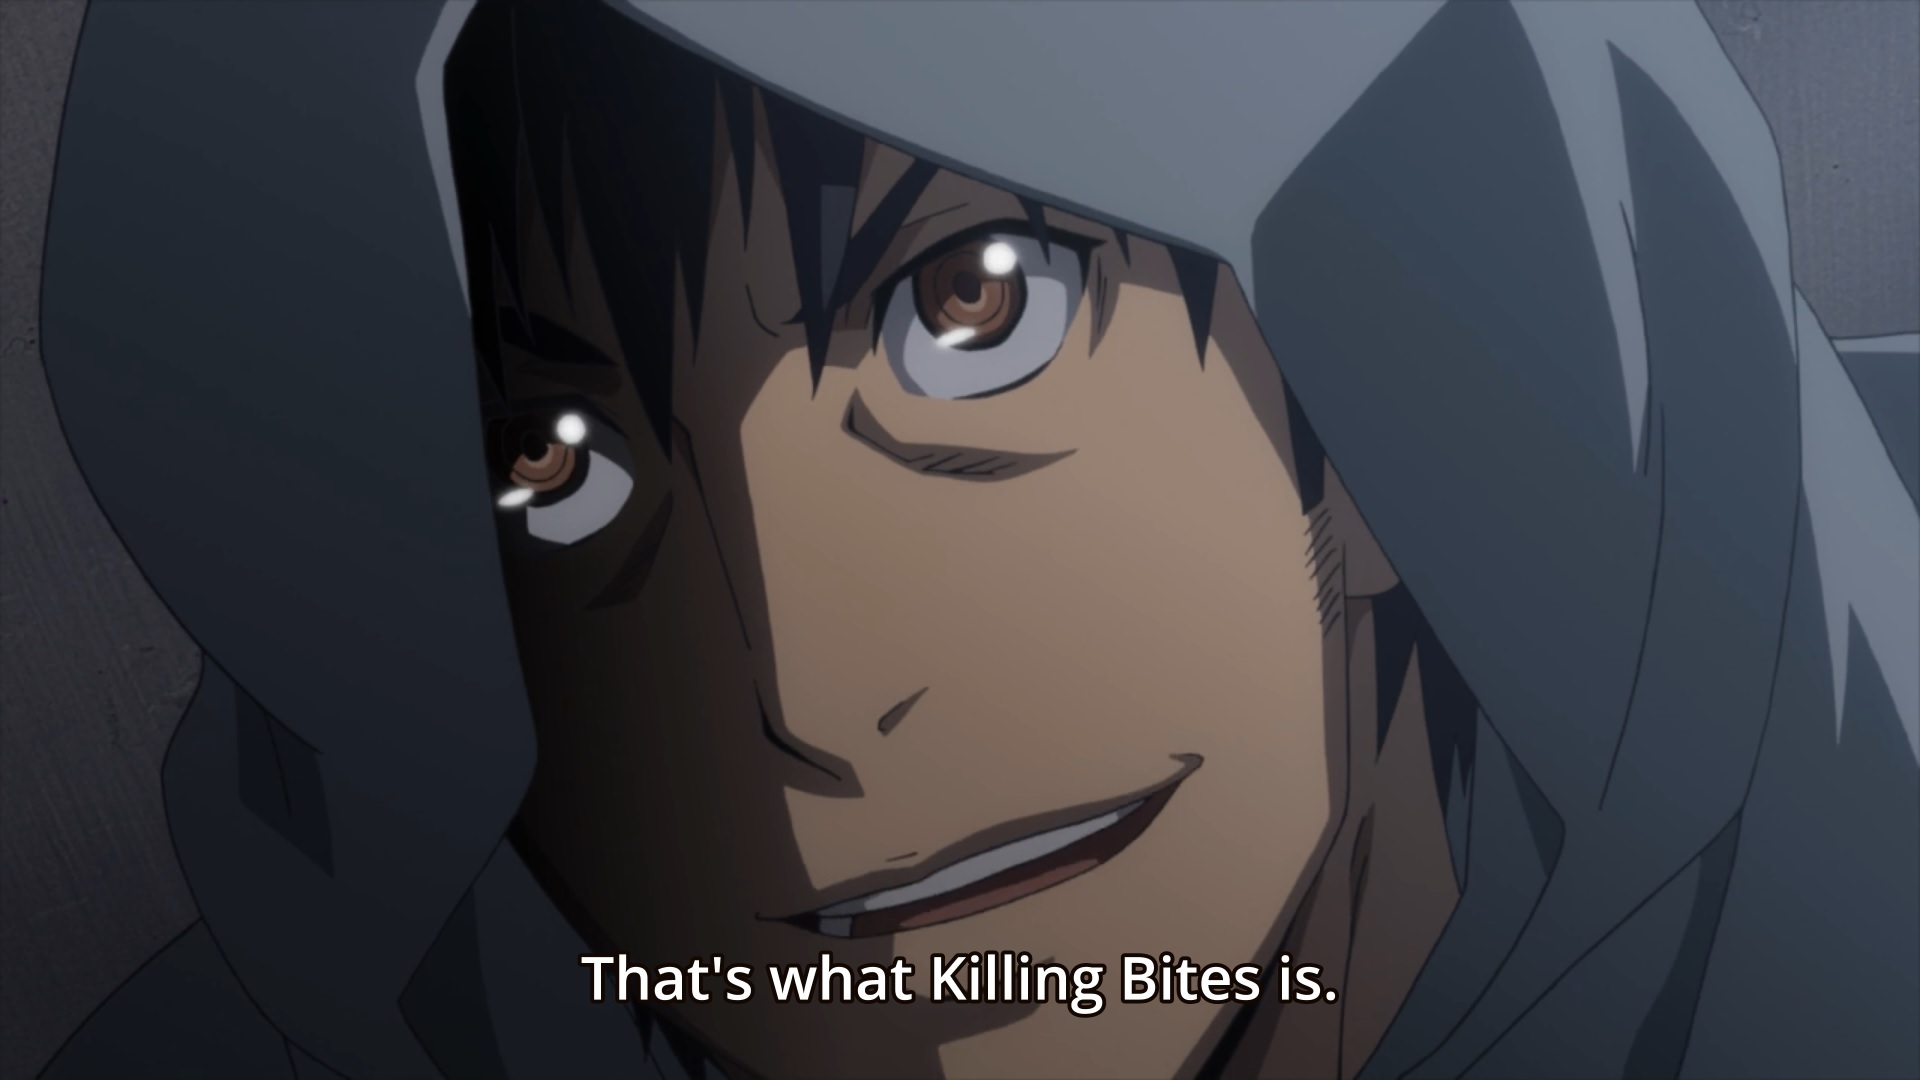 Killing Bites Ep. 12 (Final): Why can't this show just go away quietly?